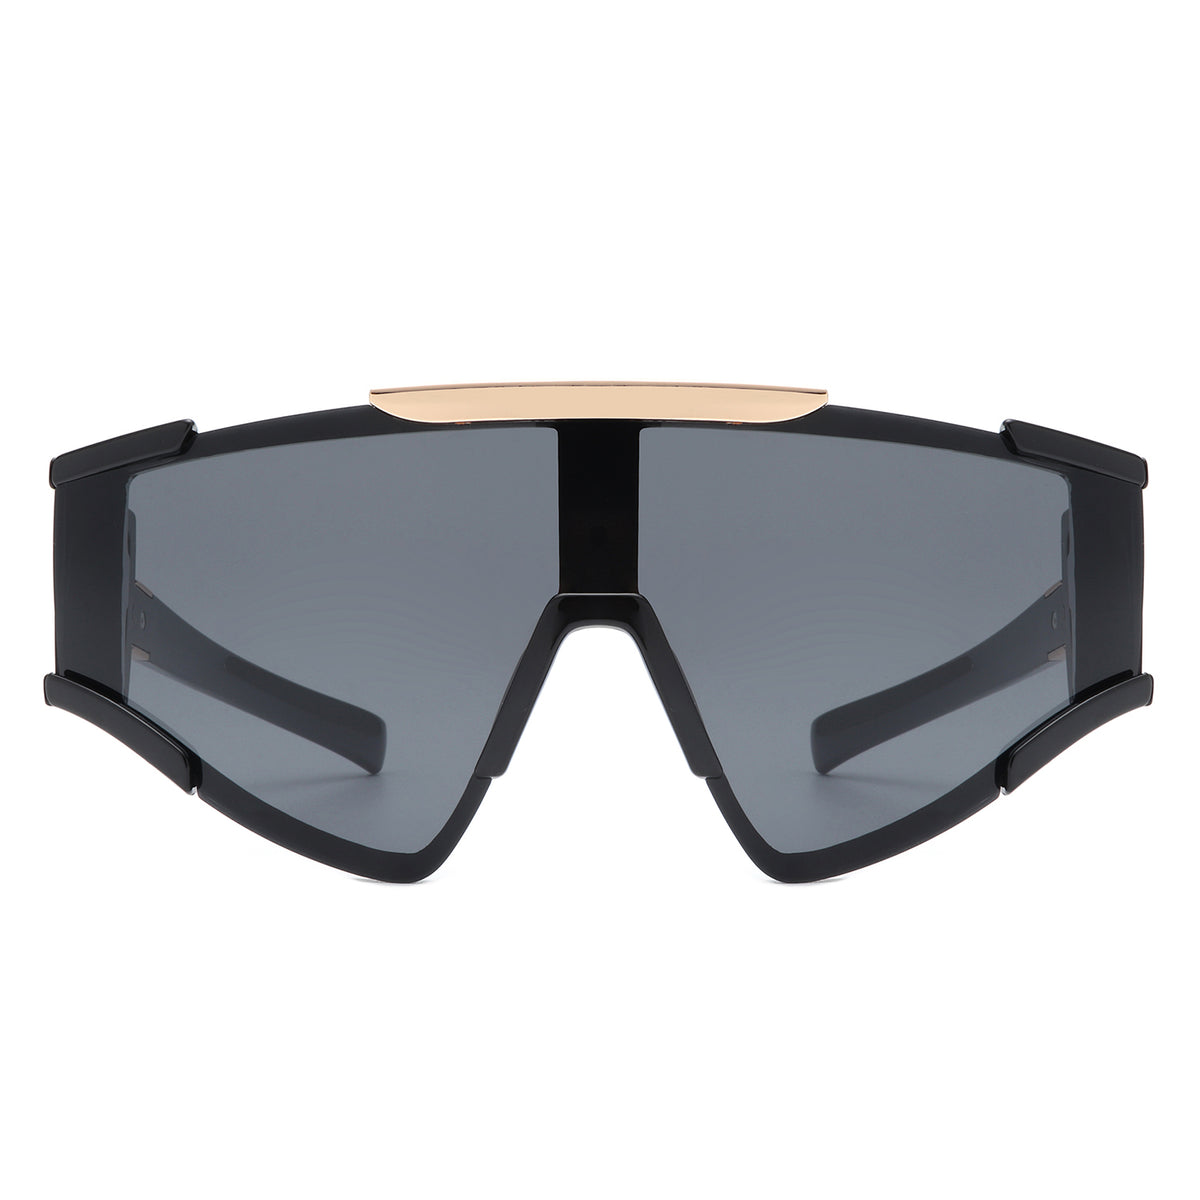 Fashion Wholesale Square Flat Top Sunglasses With Metal Top Bar In